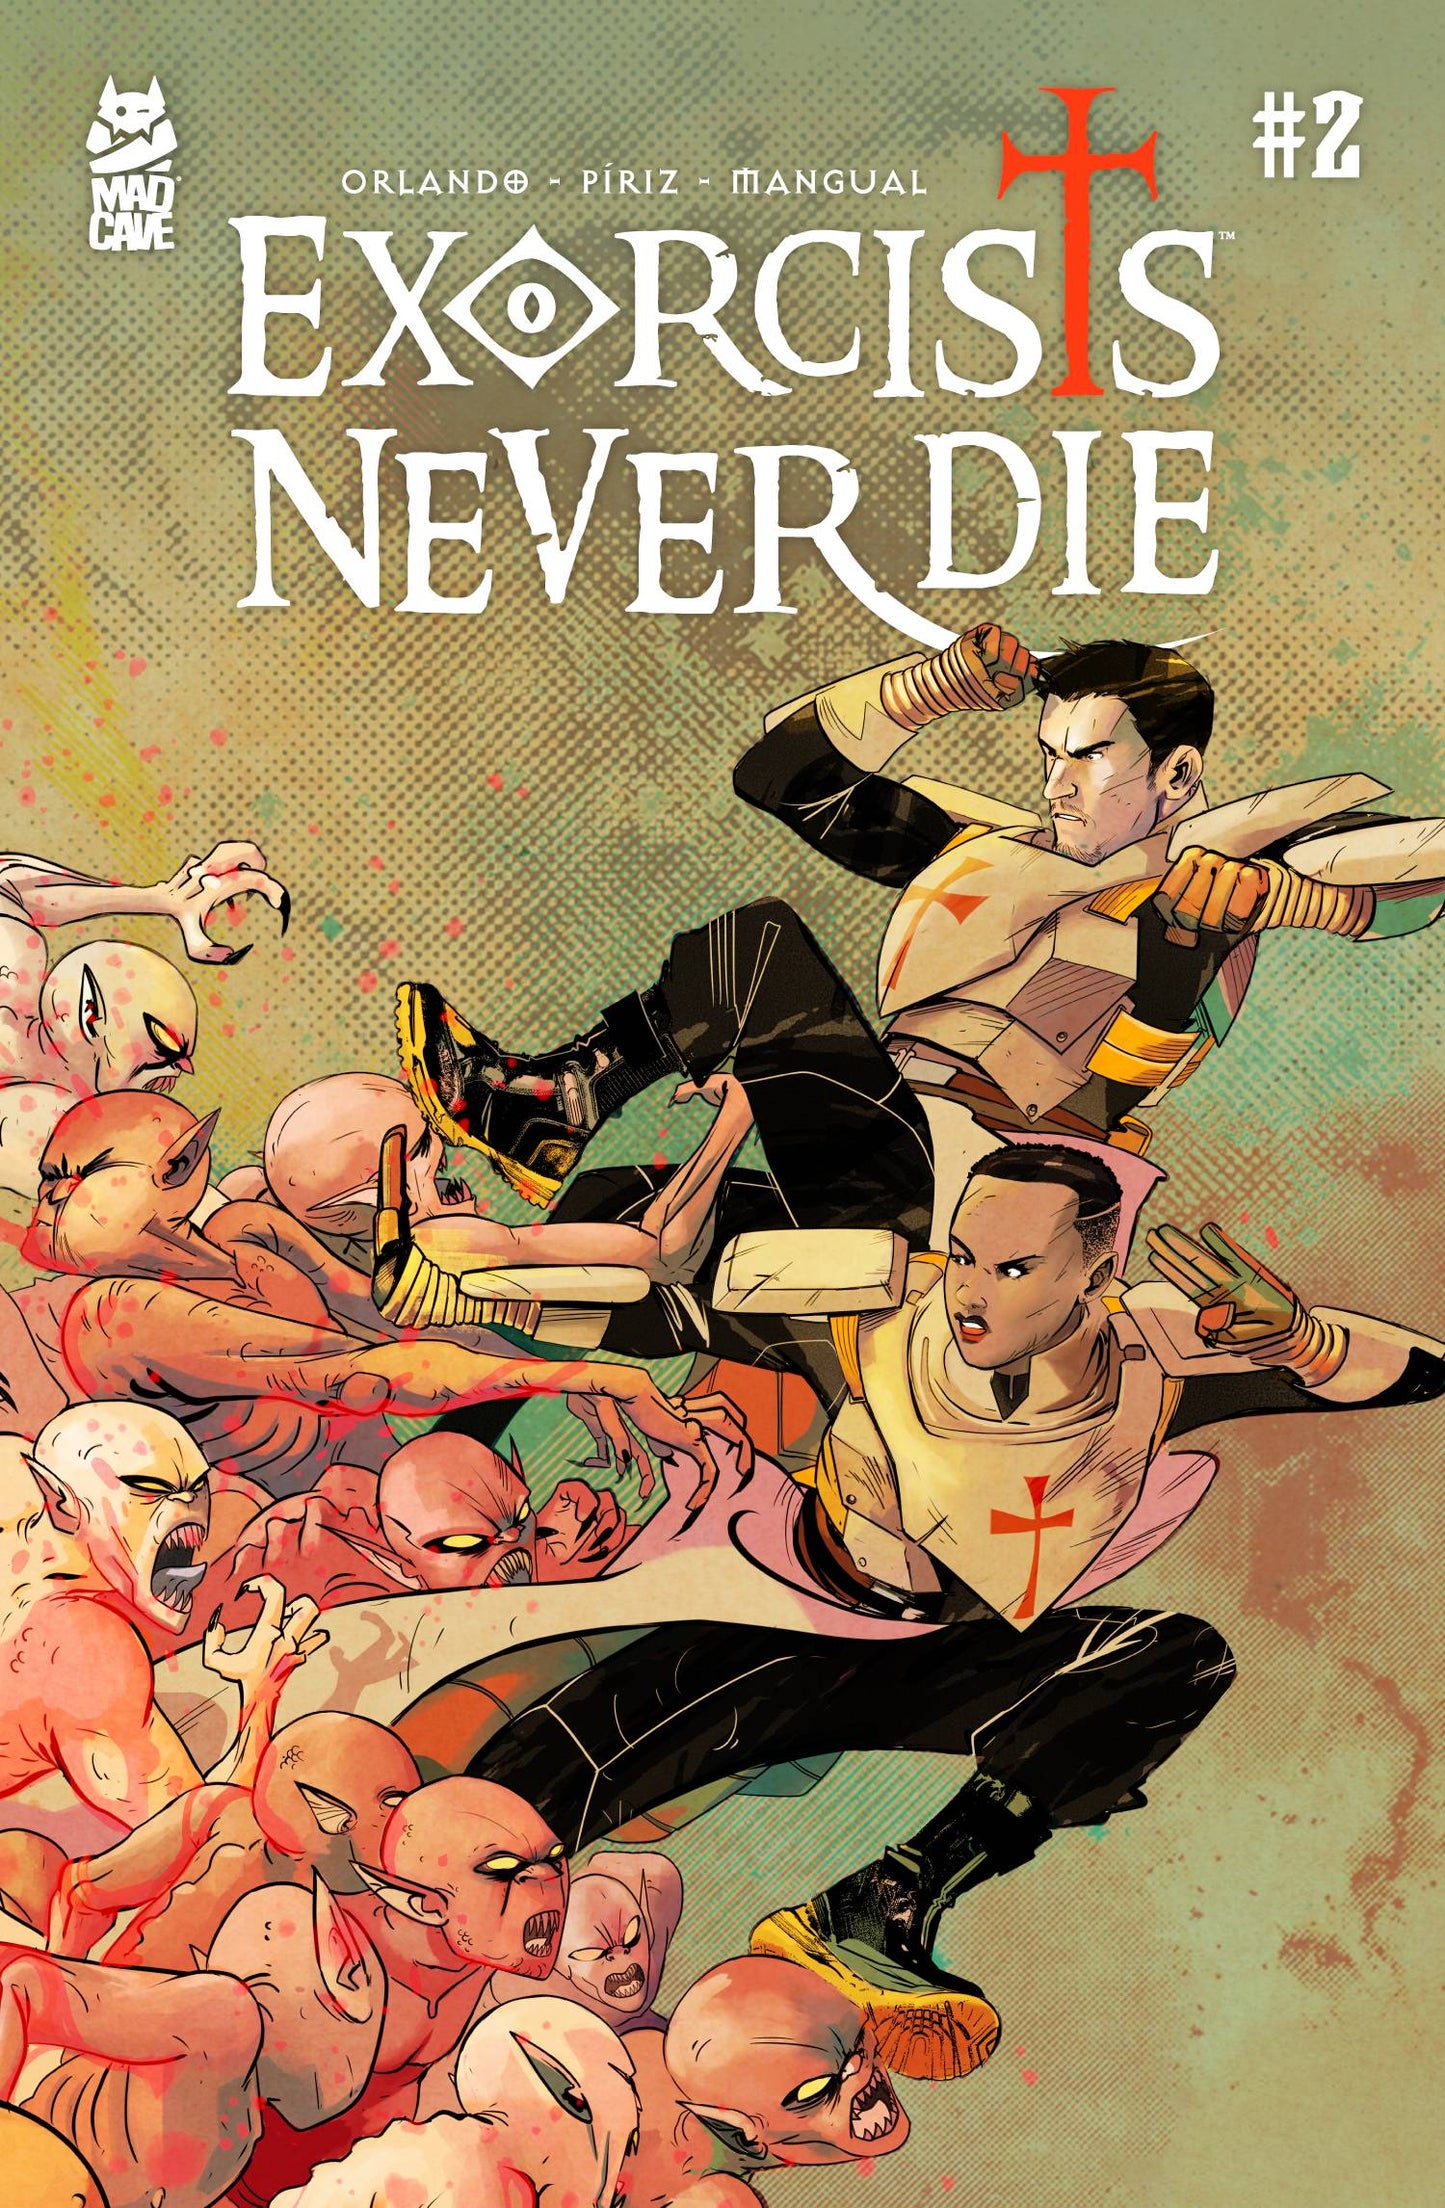 Exorcists Never Die #2 (Of 6) (C: 0-1-0) (05/24/2023)